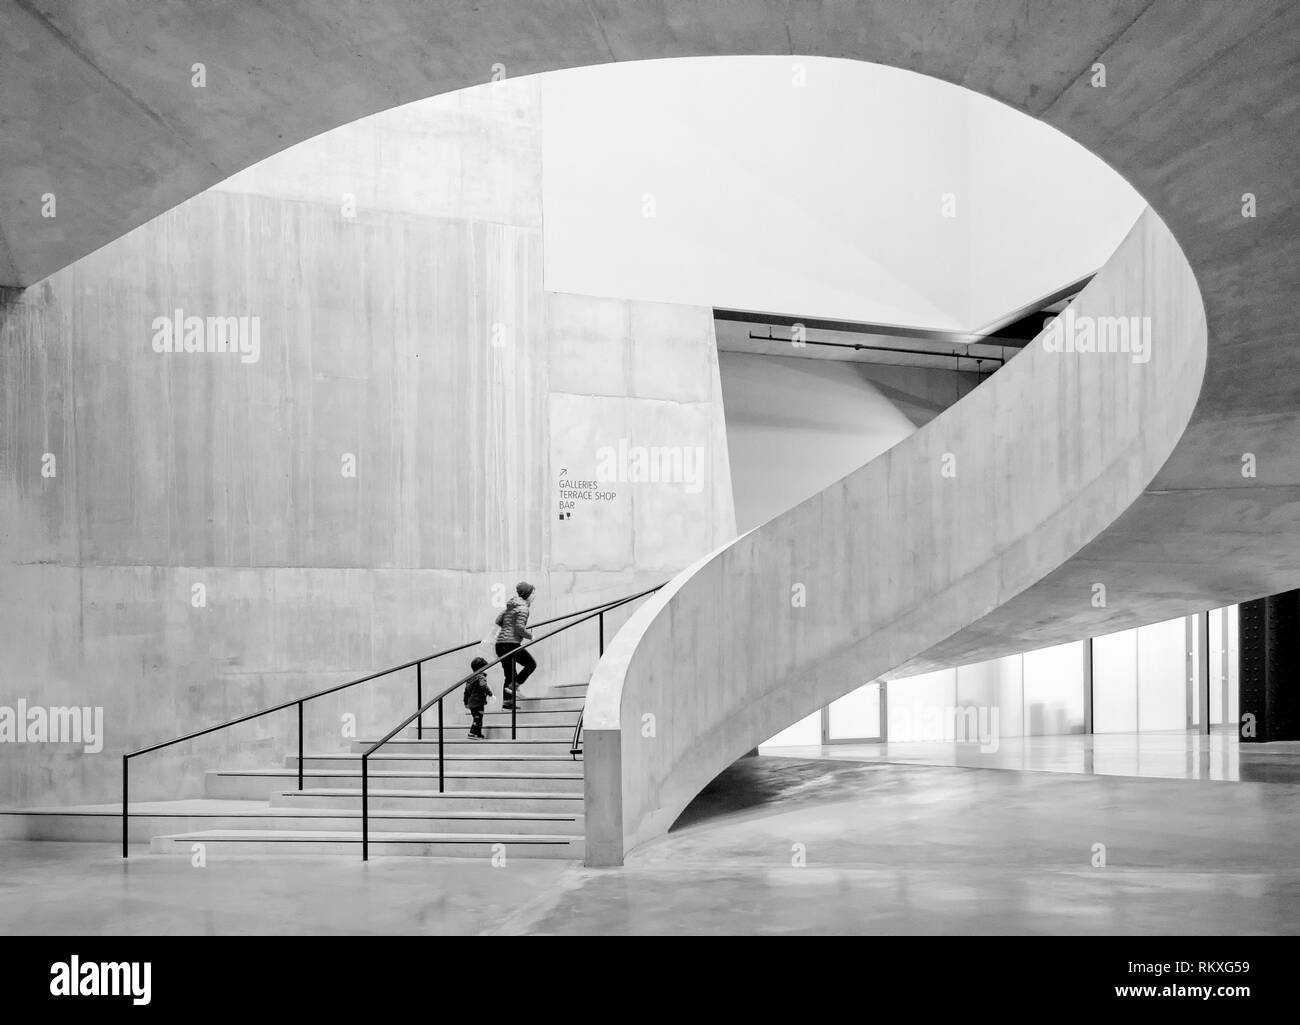 A mother and her son, a c walking up the stairs at Tate Modern in London.  This is a black & white image because it highlights the interesting shapes. Stock Photo